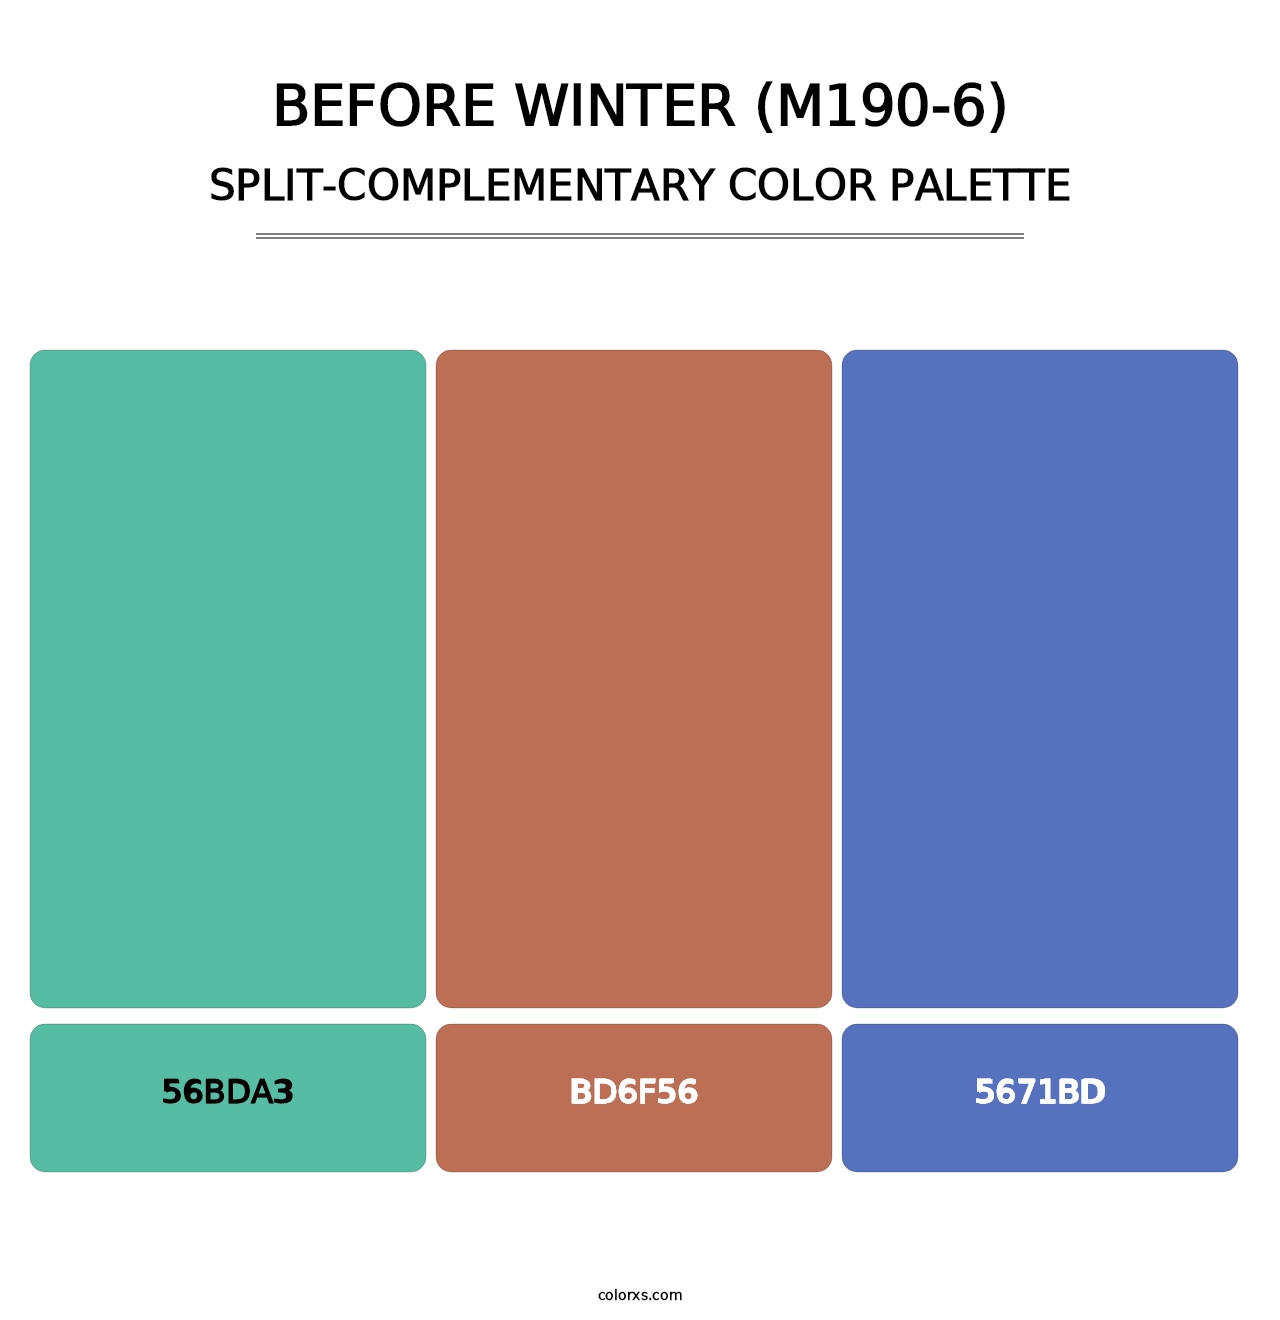 Before Winter (M190-6) - Split-Complementary Color Palette